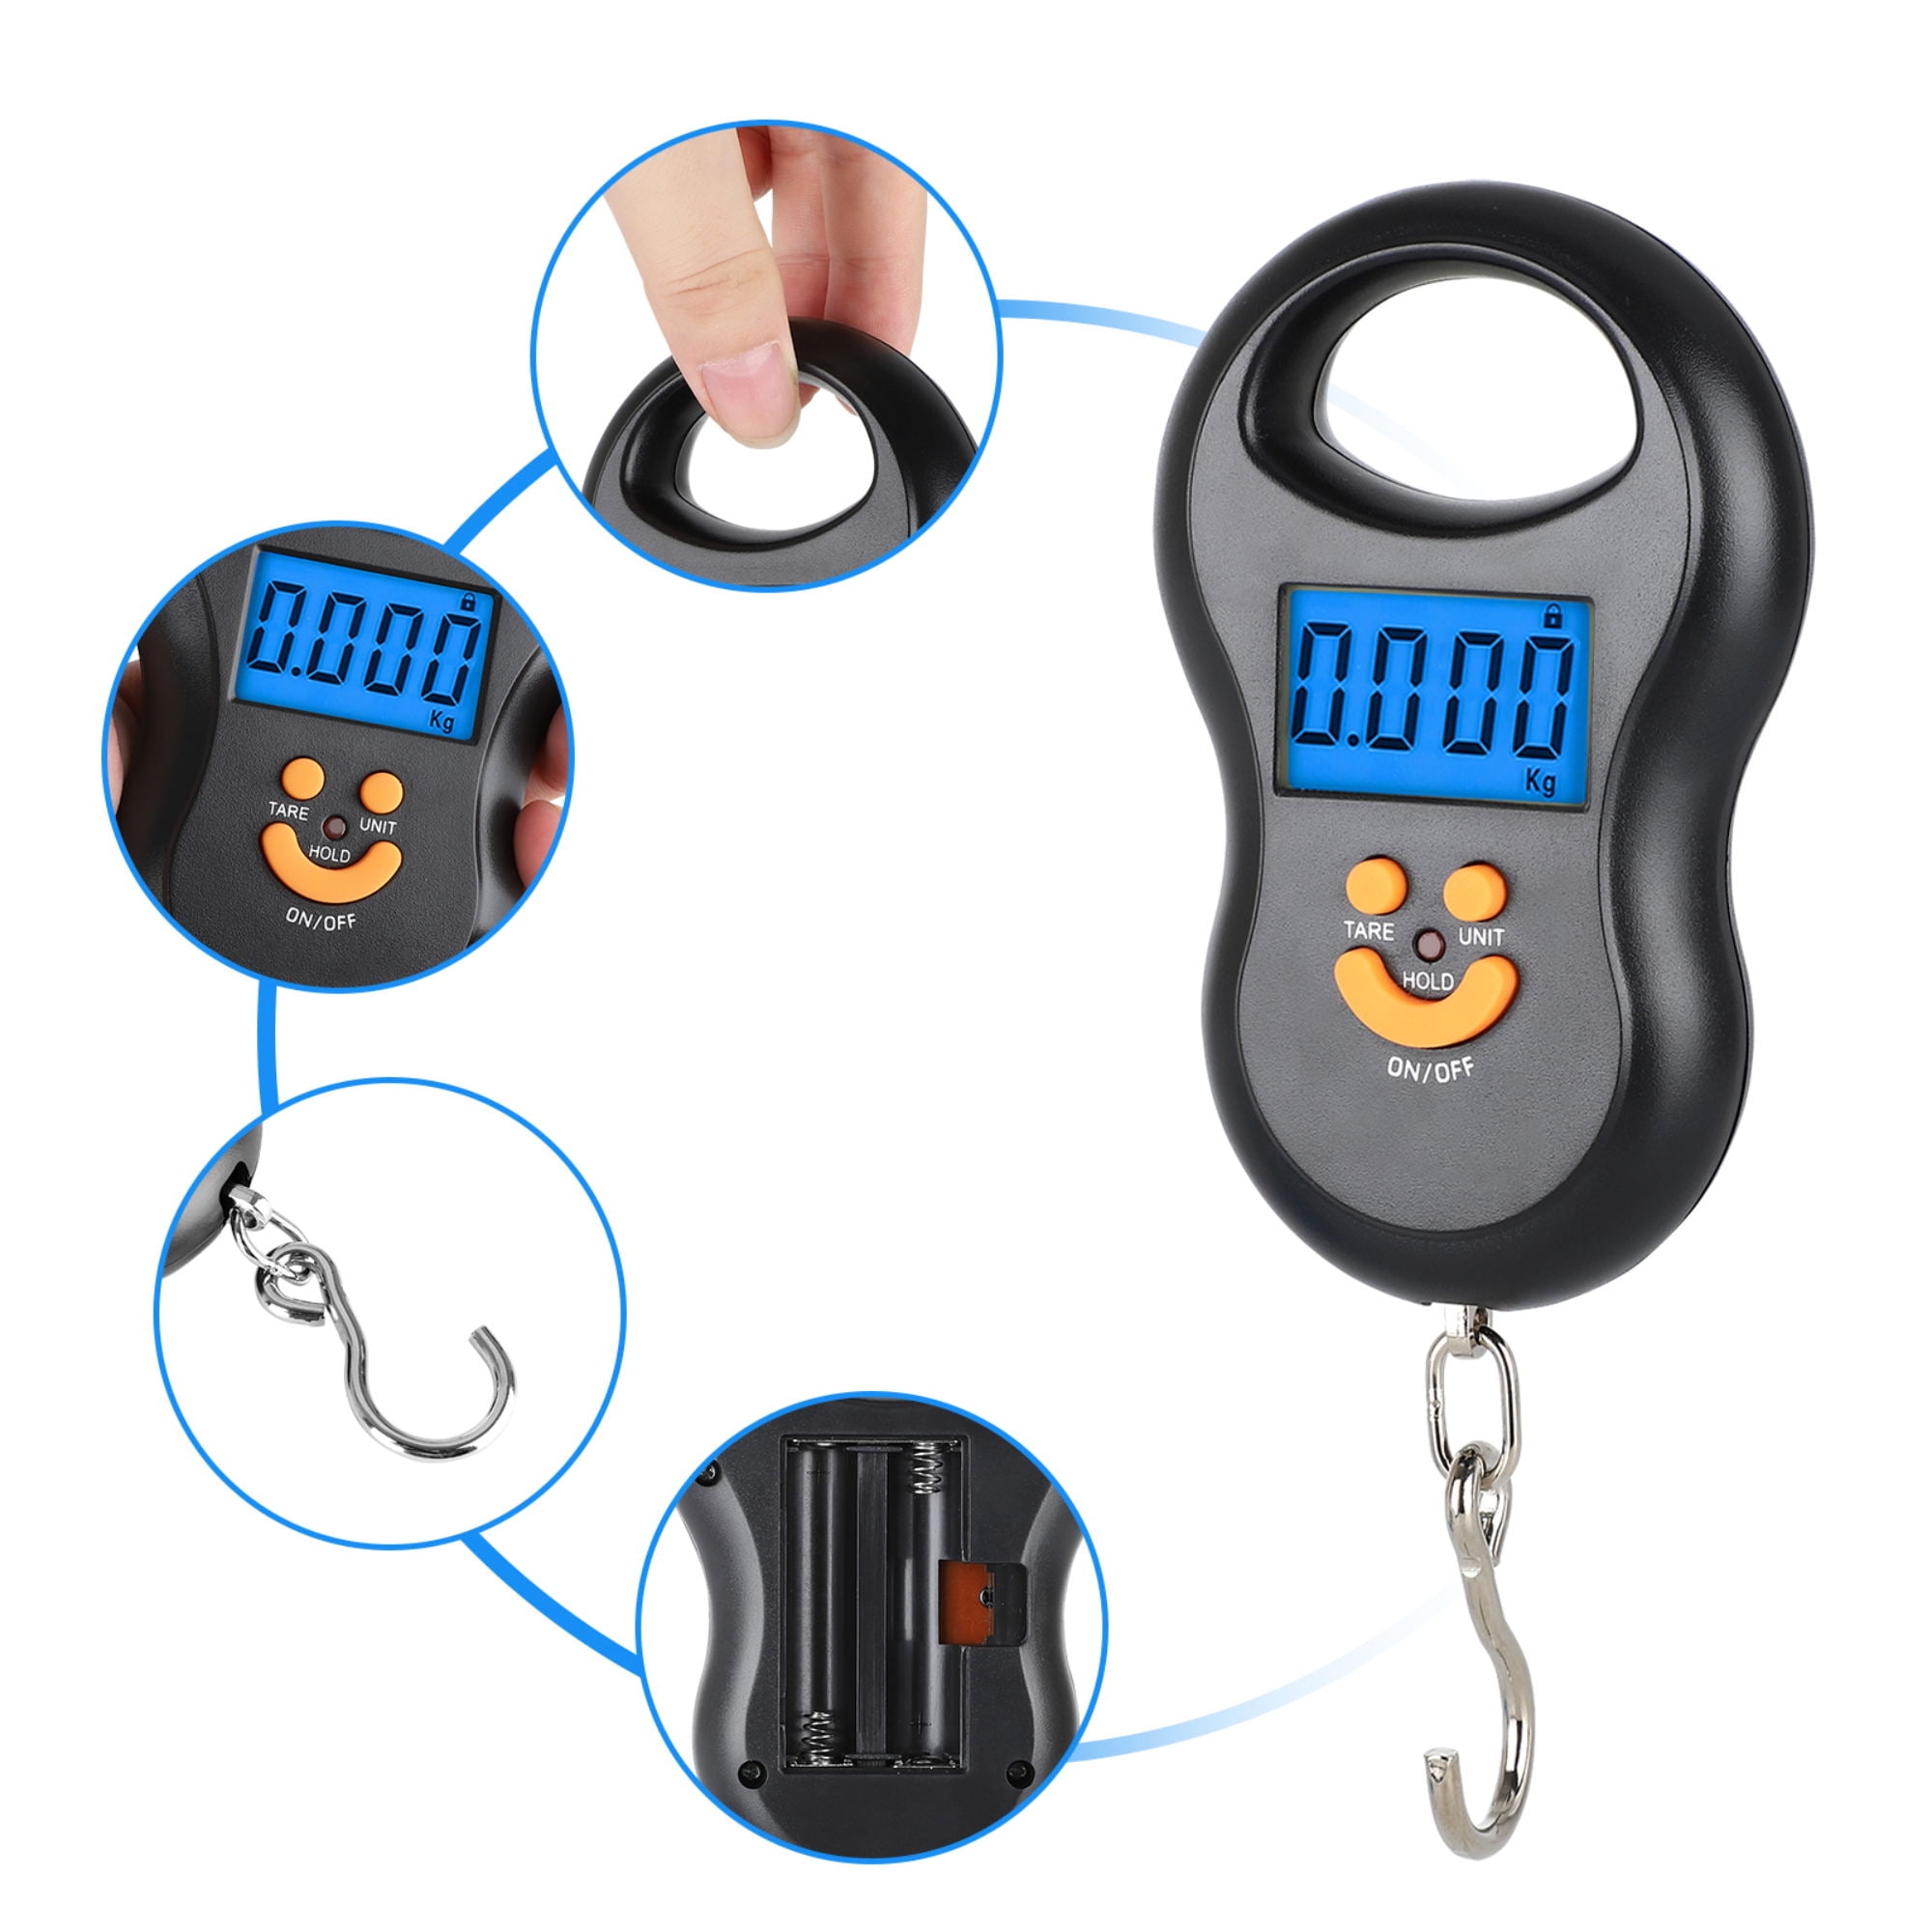 RST-08081 Digital Weight Luggage Fishing Hanging Scale 20kg lb oz